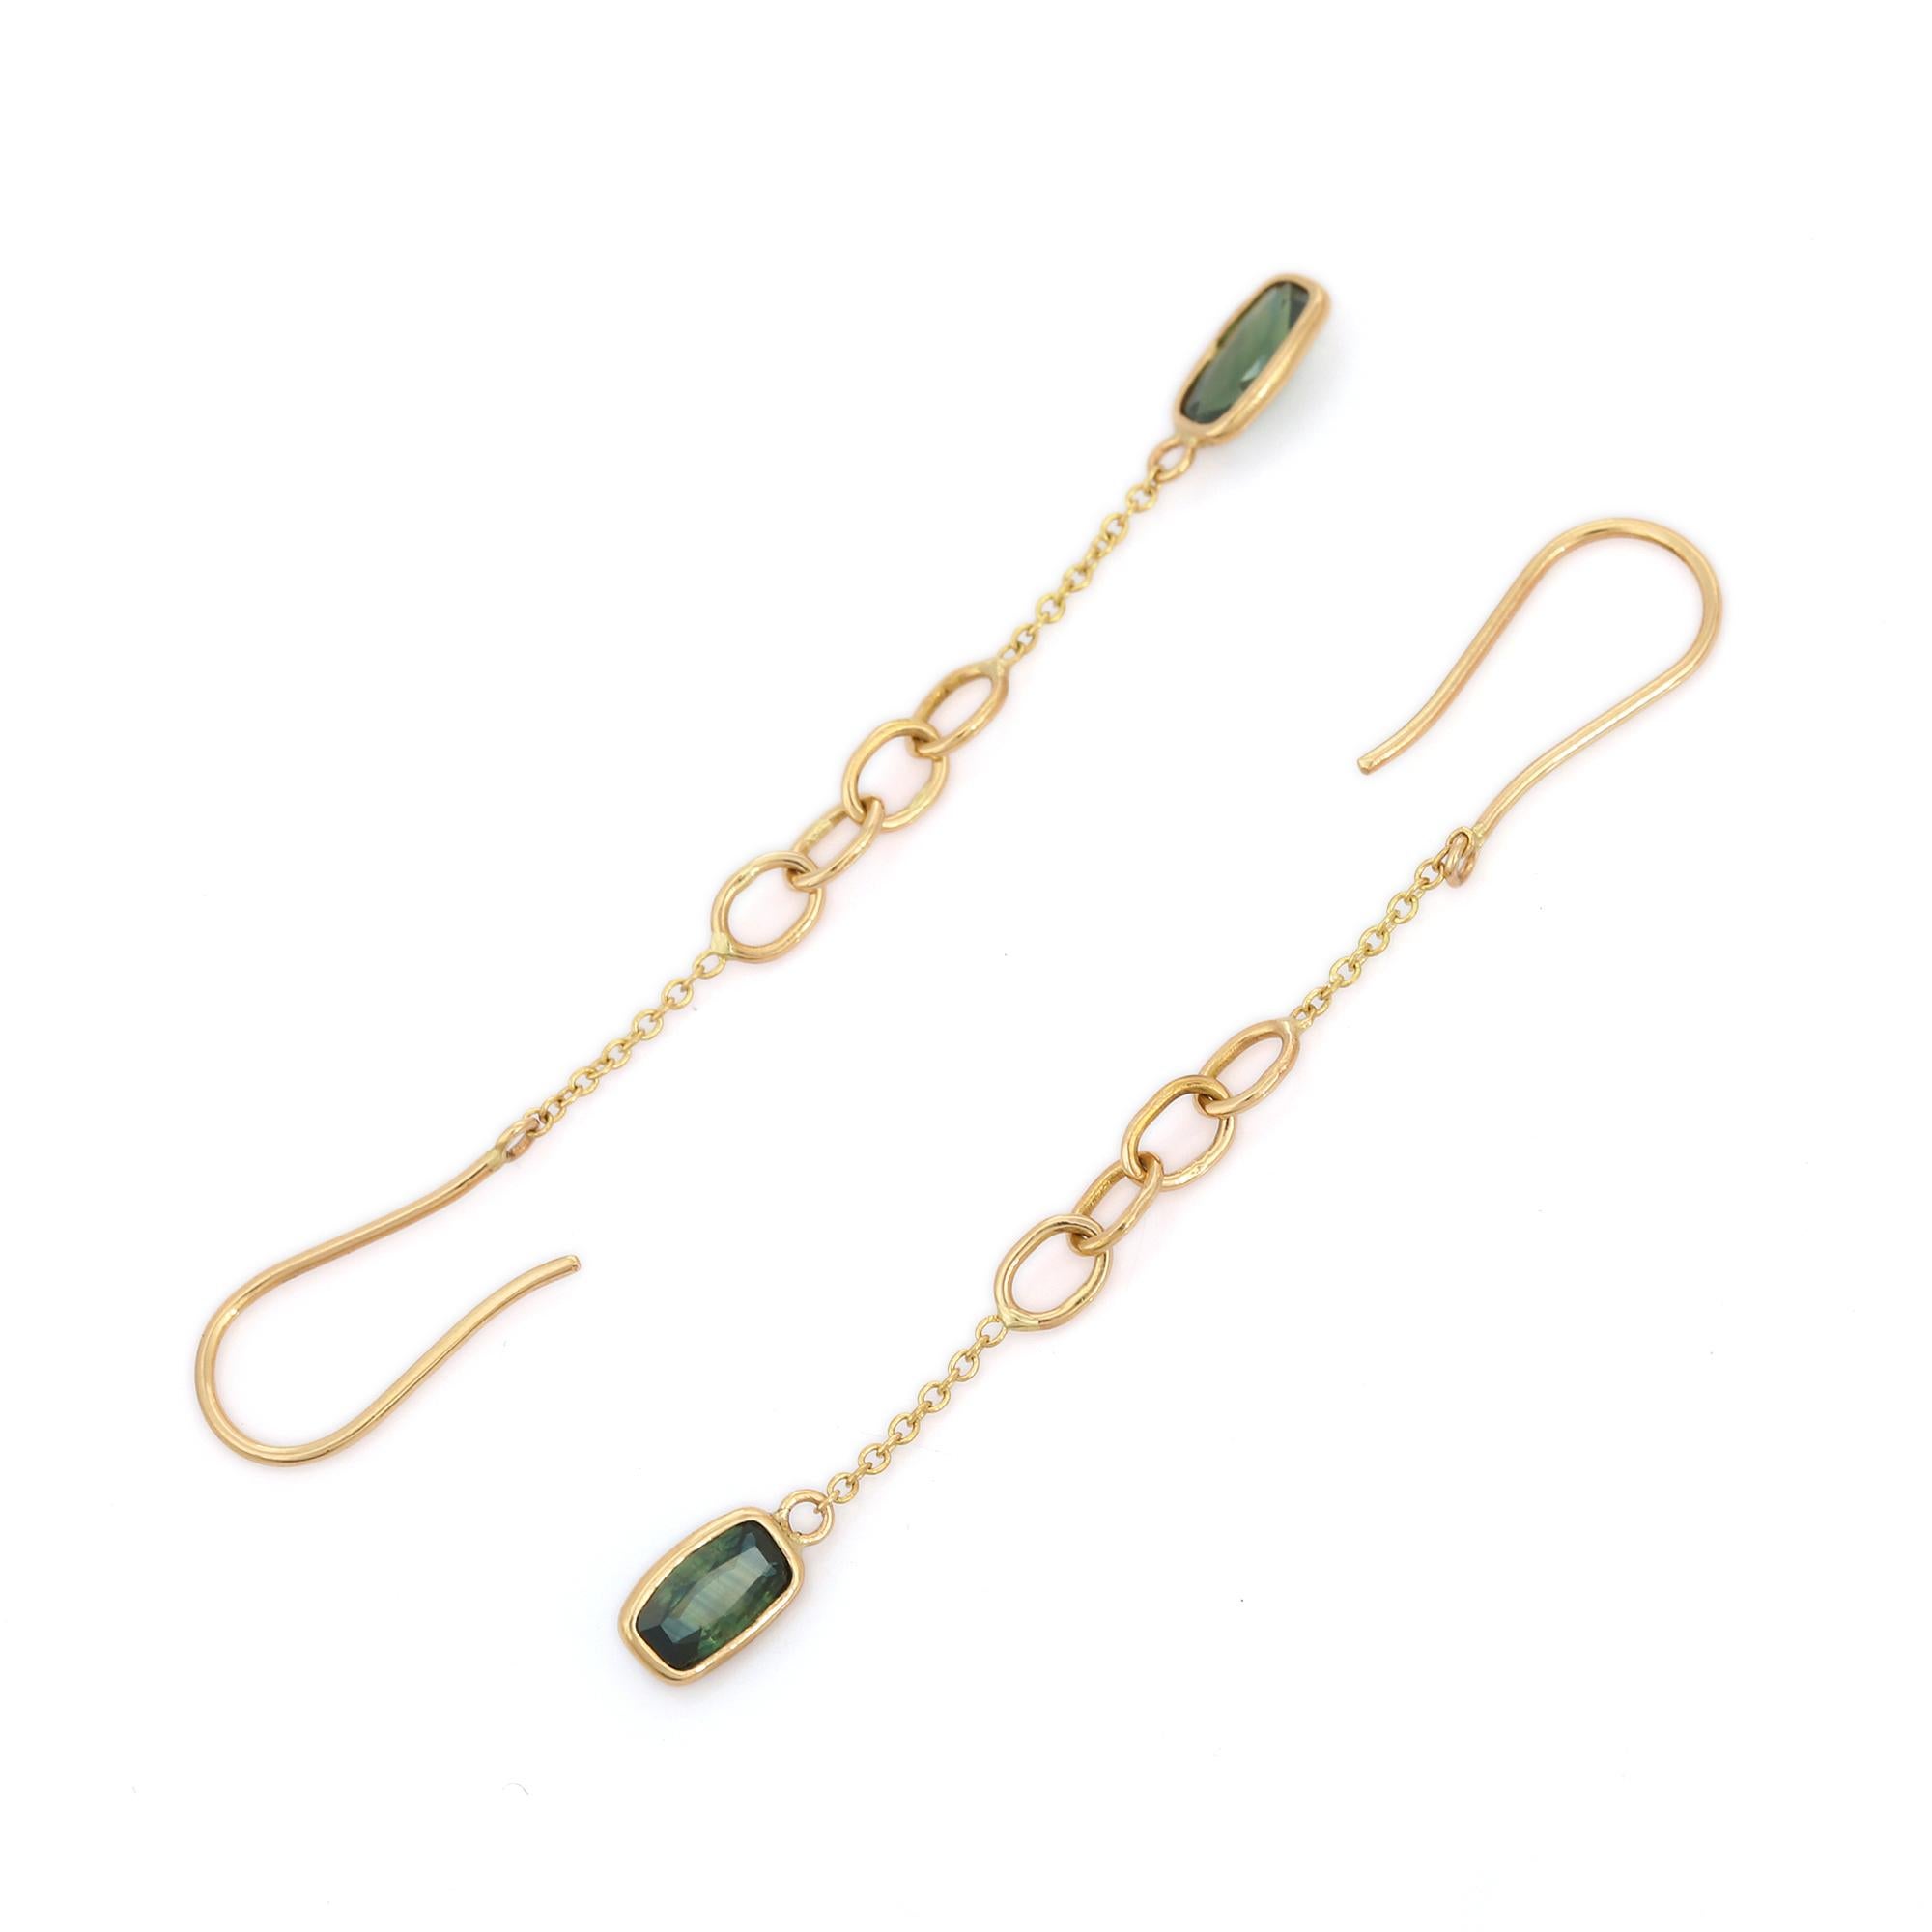 You shall need green sapphire dangle earrings to make a statement with your look. These earrings create a sparkling, luxurious look featuring cushion cut gemstone.
If you love to gravitate towards unique styles, this piece of jewelry is perfect for